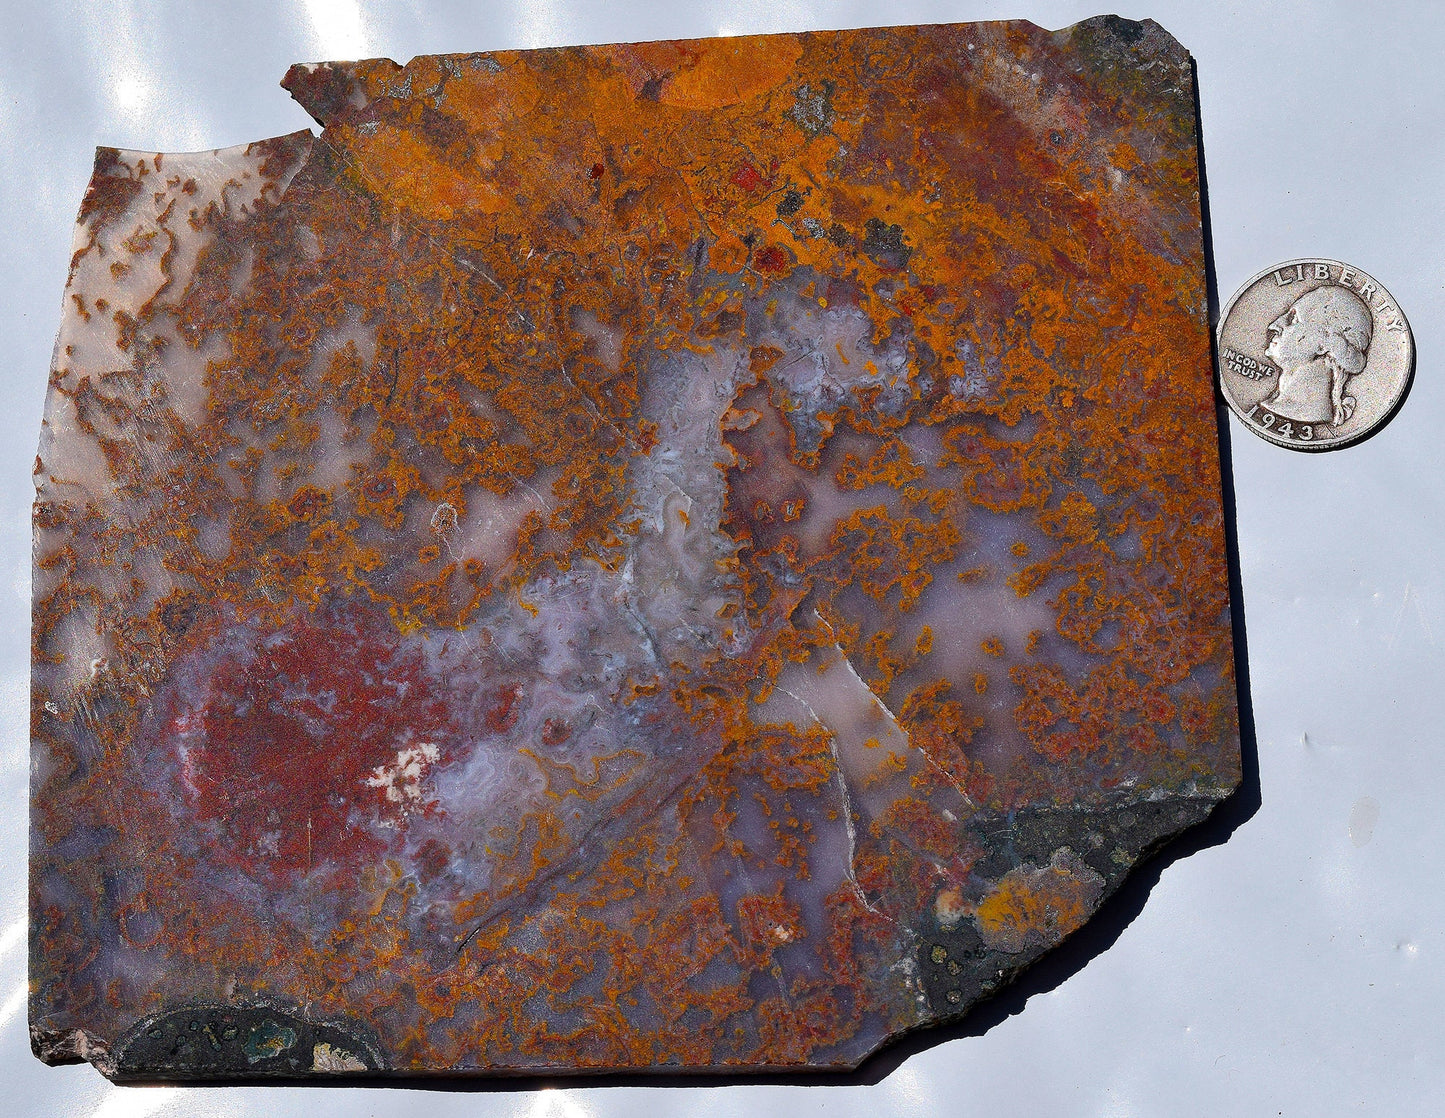 Rare, multi-colored moss agate from the Ahouli beds in Morocco. #3